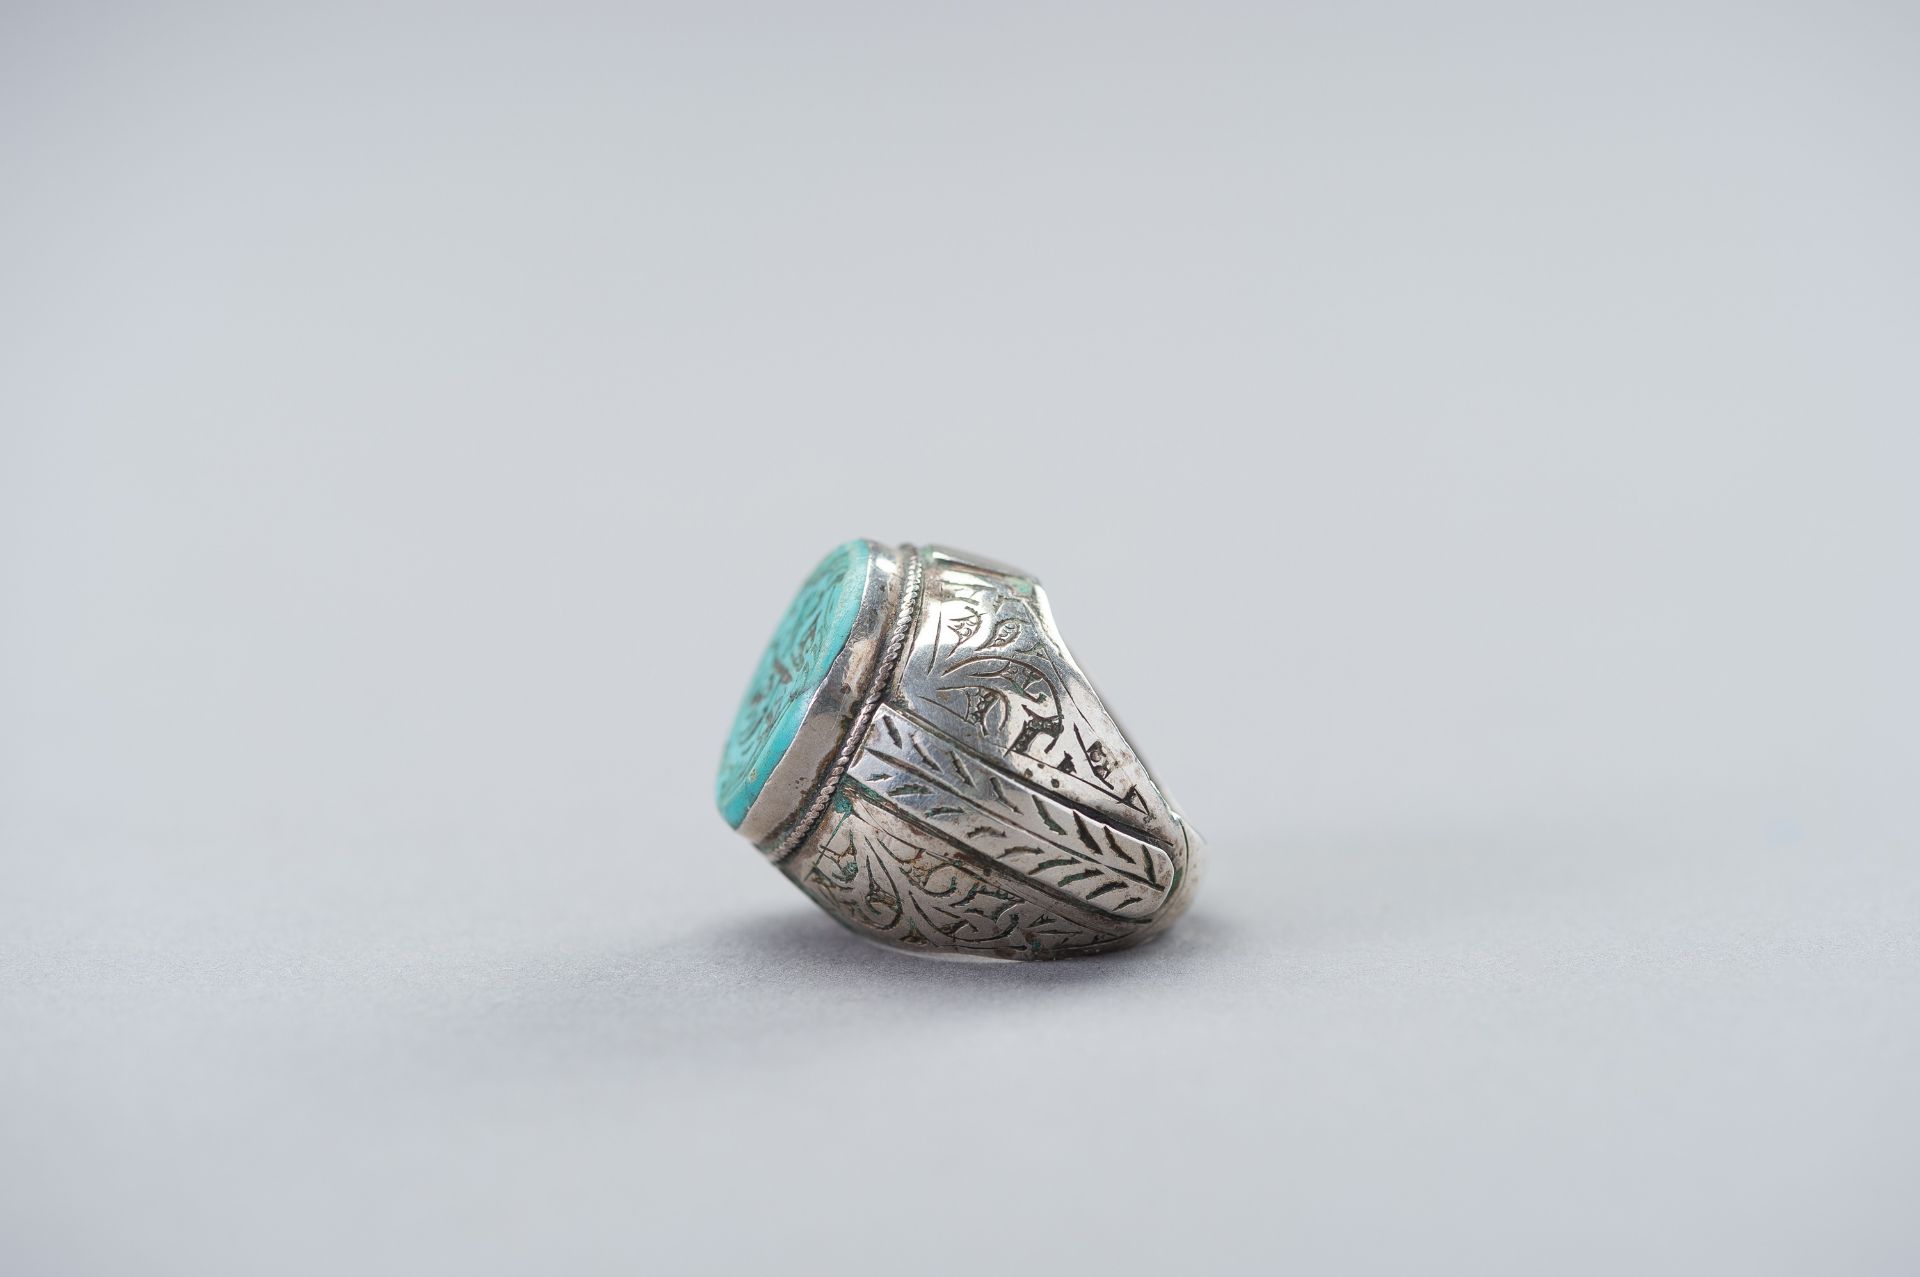 A PERSIAN SILVER RING WITH TURQUOISE MATRIX INTAGLIO, 19TH CENTURY - Image 6 of 9